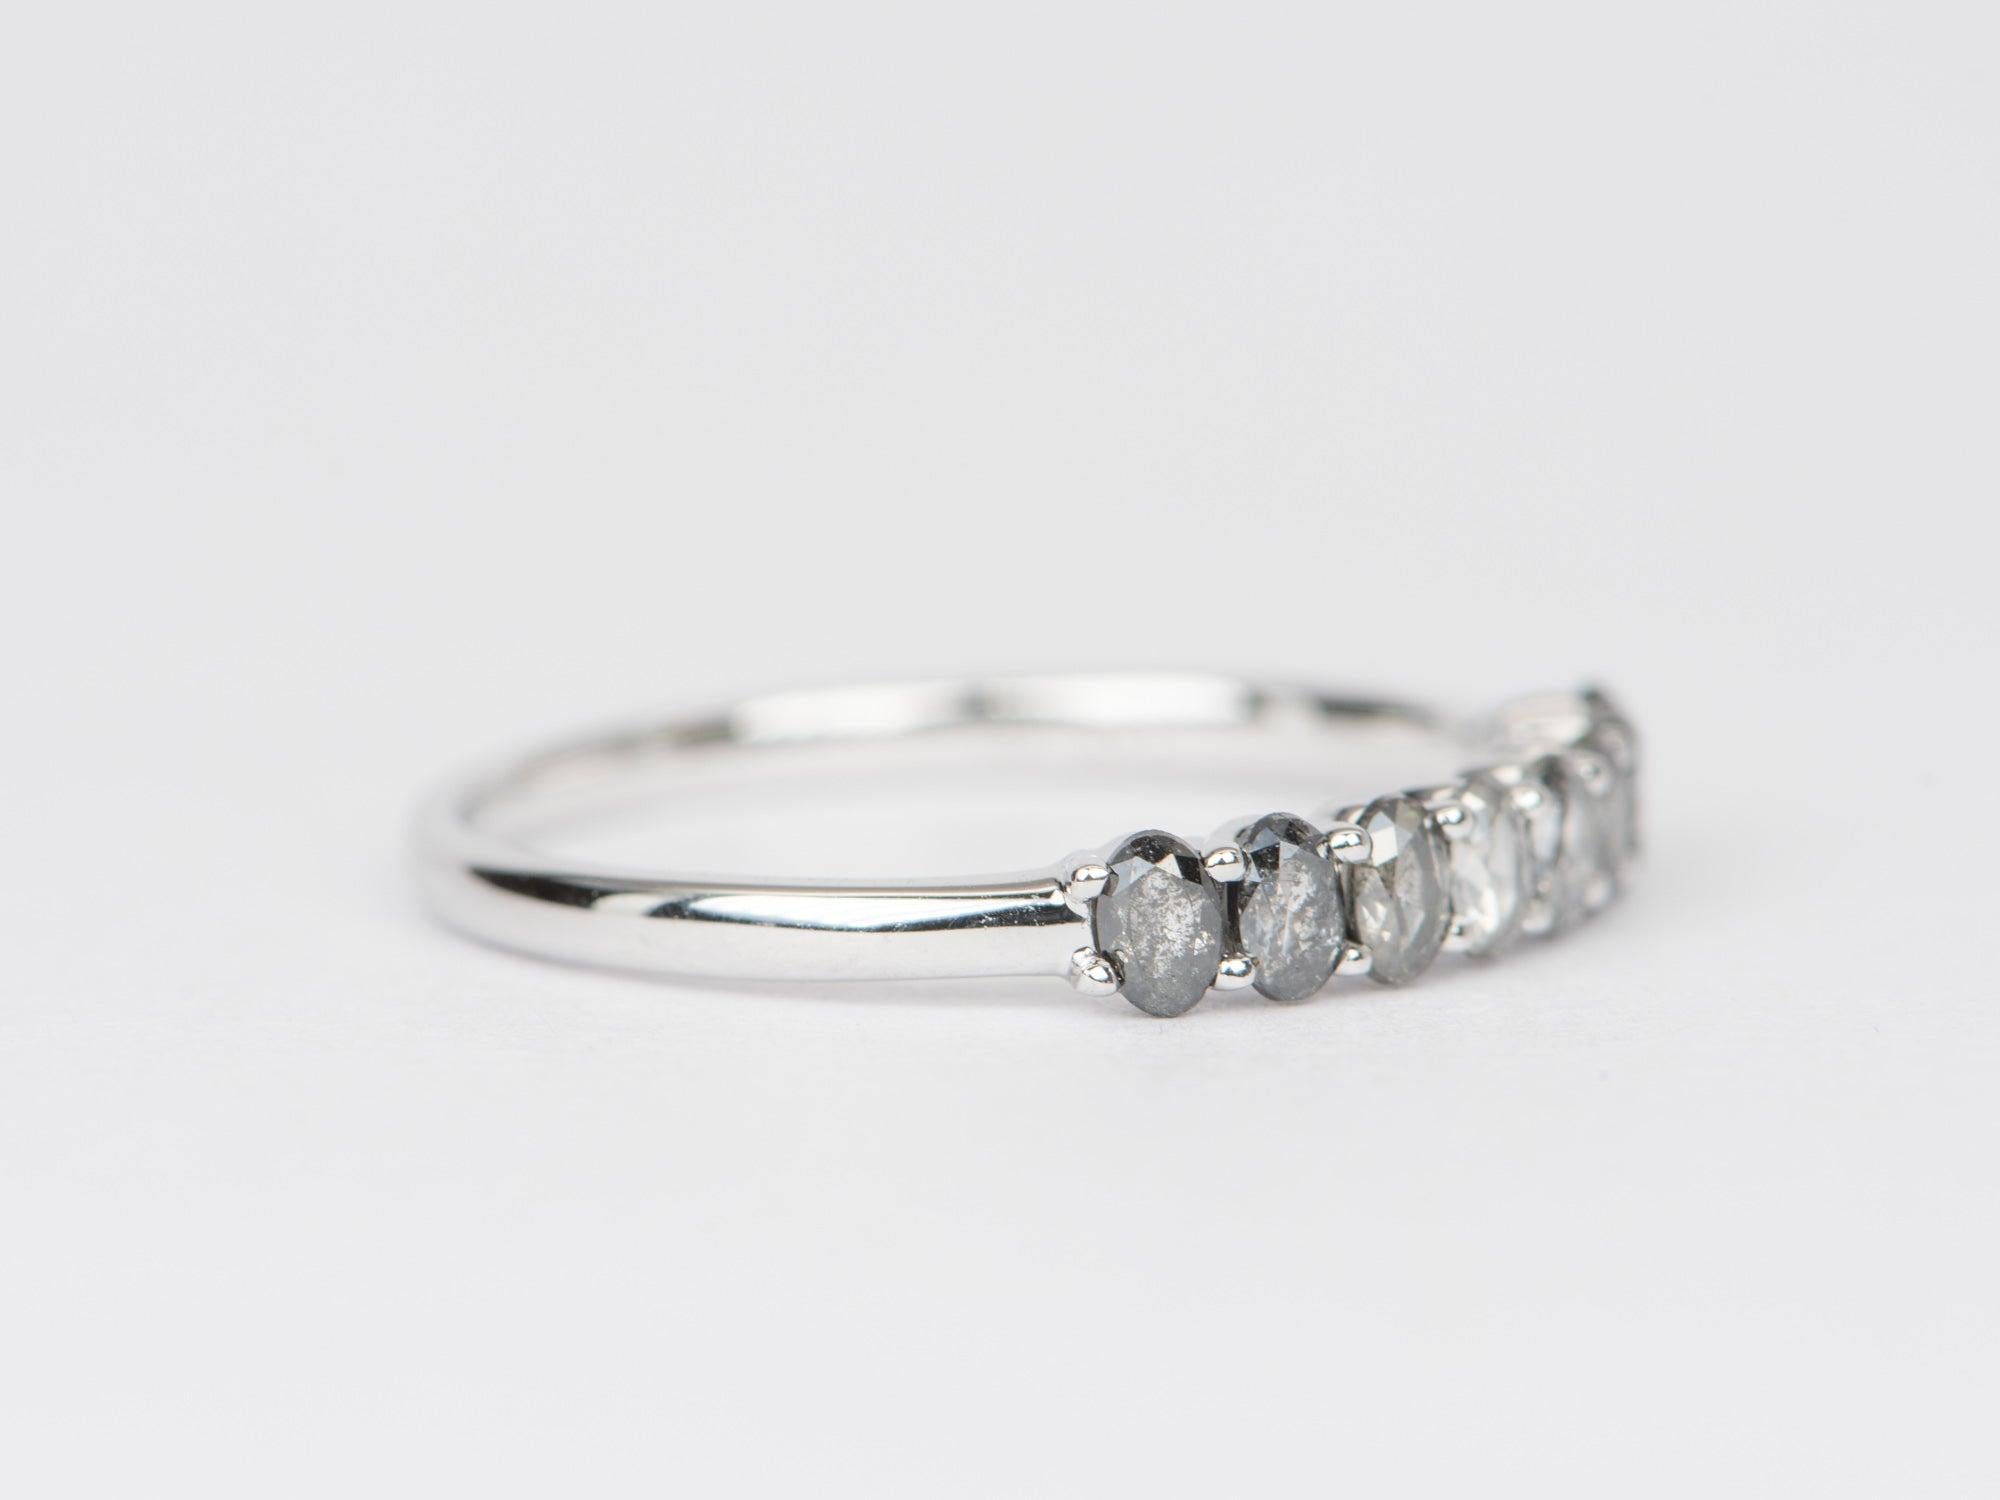 ♥ A solid 14K white gold ring set with oval-shaped salt and pepper diamonds
♥ The overall setting measures 3mm in width, 116mm in length, and sits 1.9mm tall from the finger

♥ Ring size: US 6.75 available (free re-sizing up or down one size)
♥ Ring